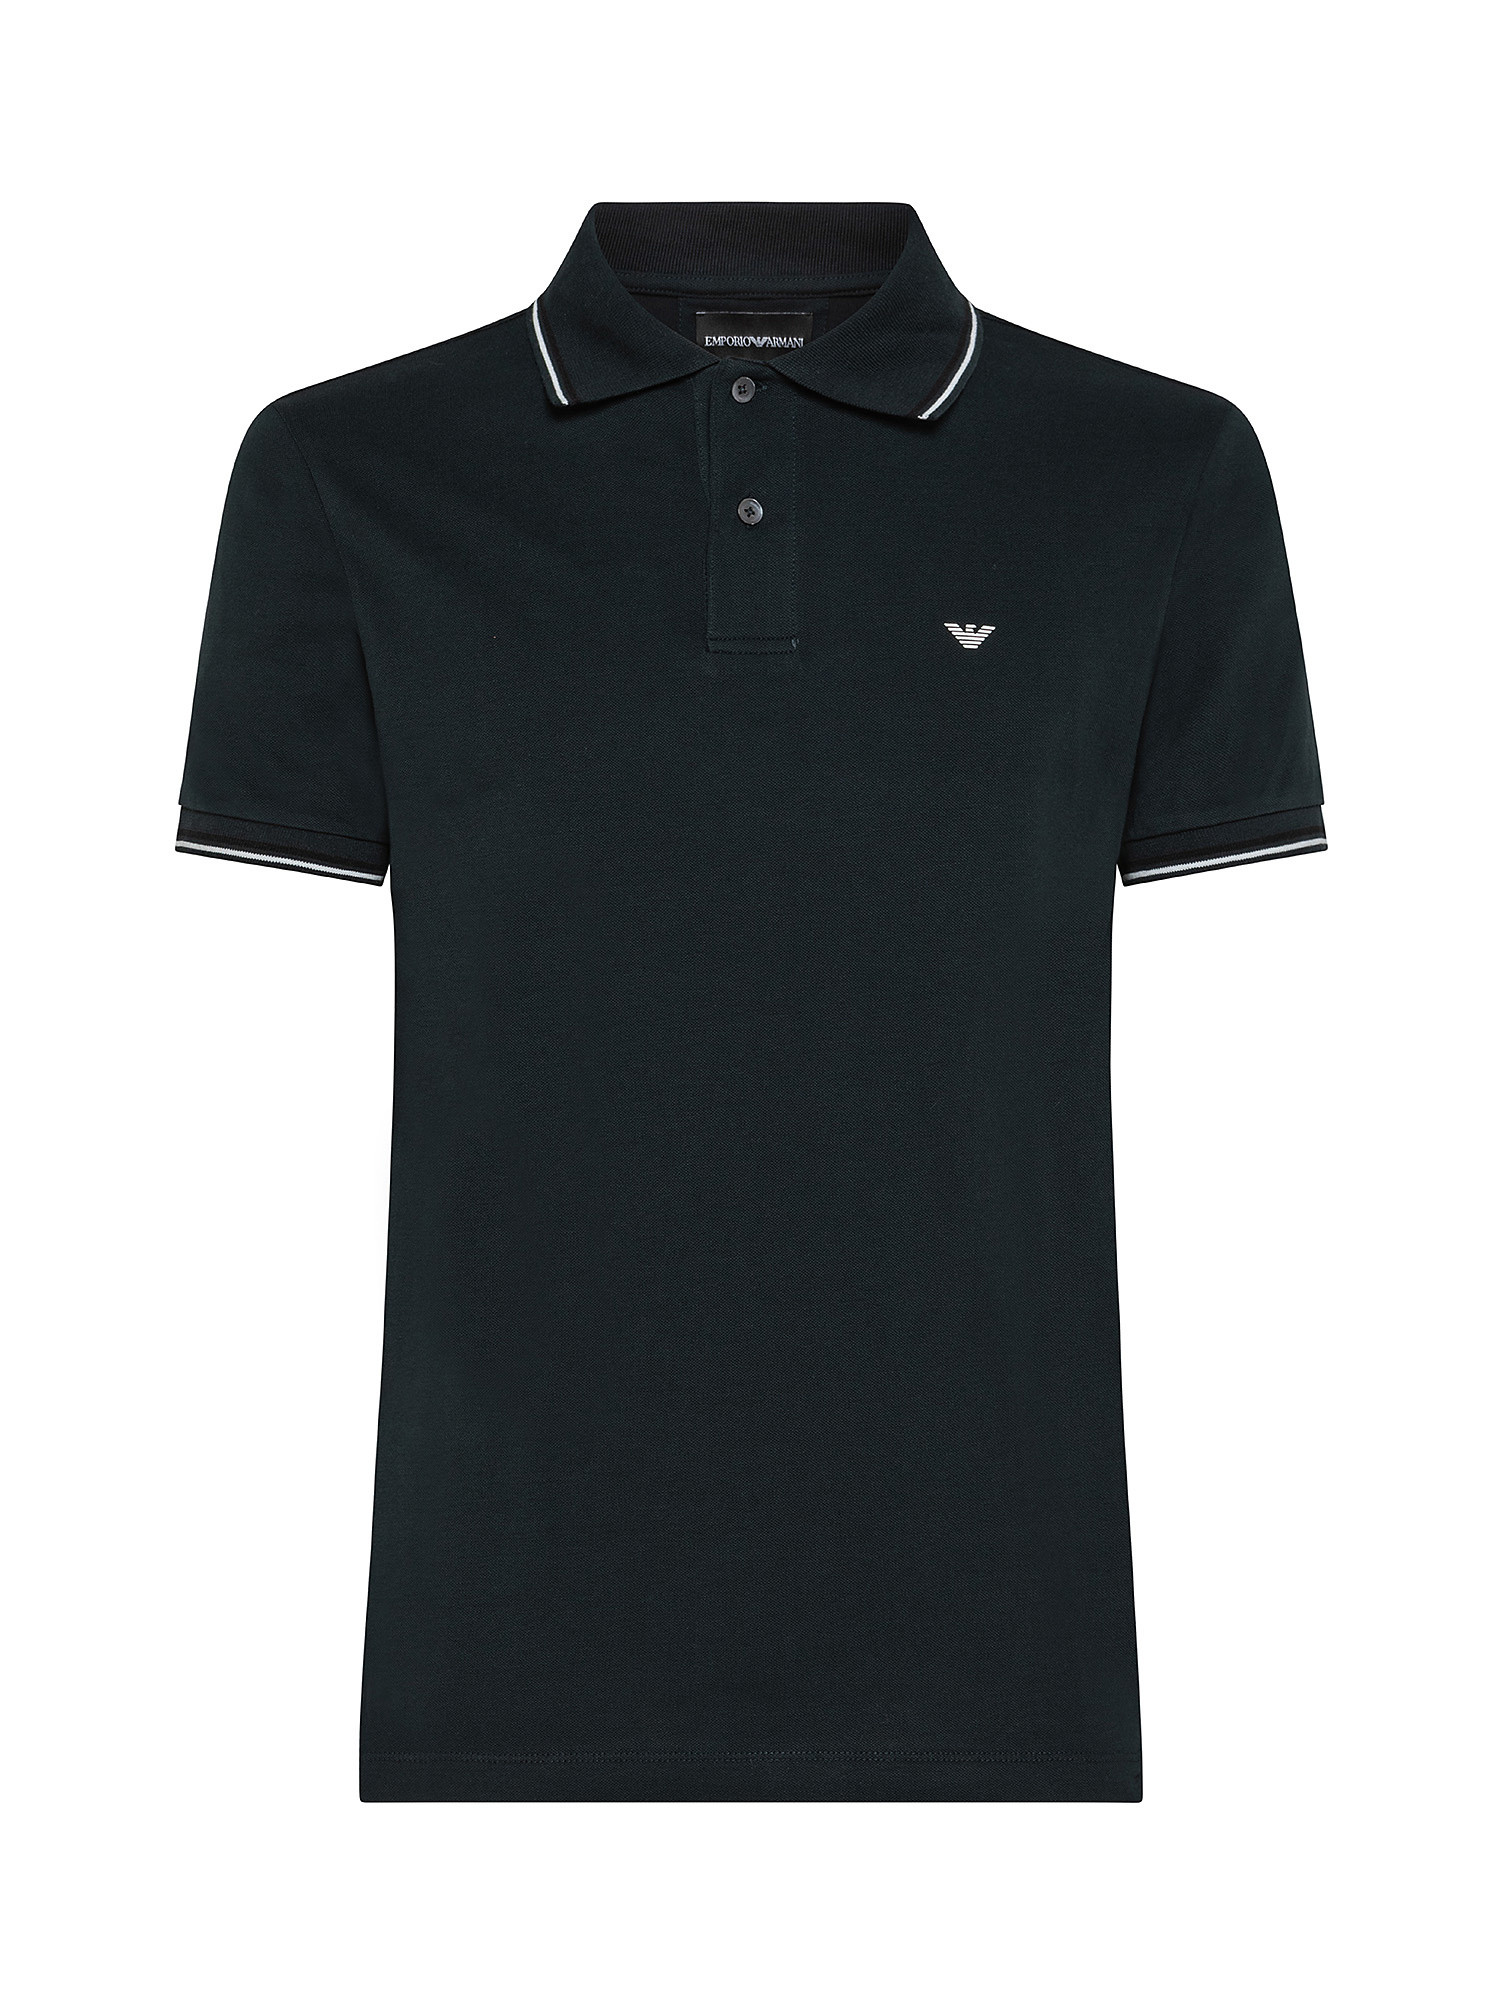 Piquet polo shirt, Green, large image number 0